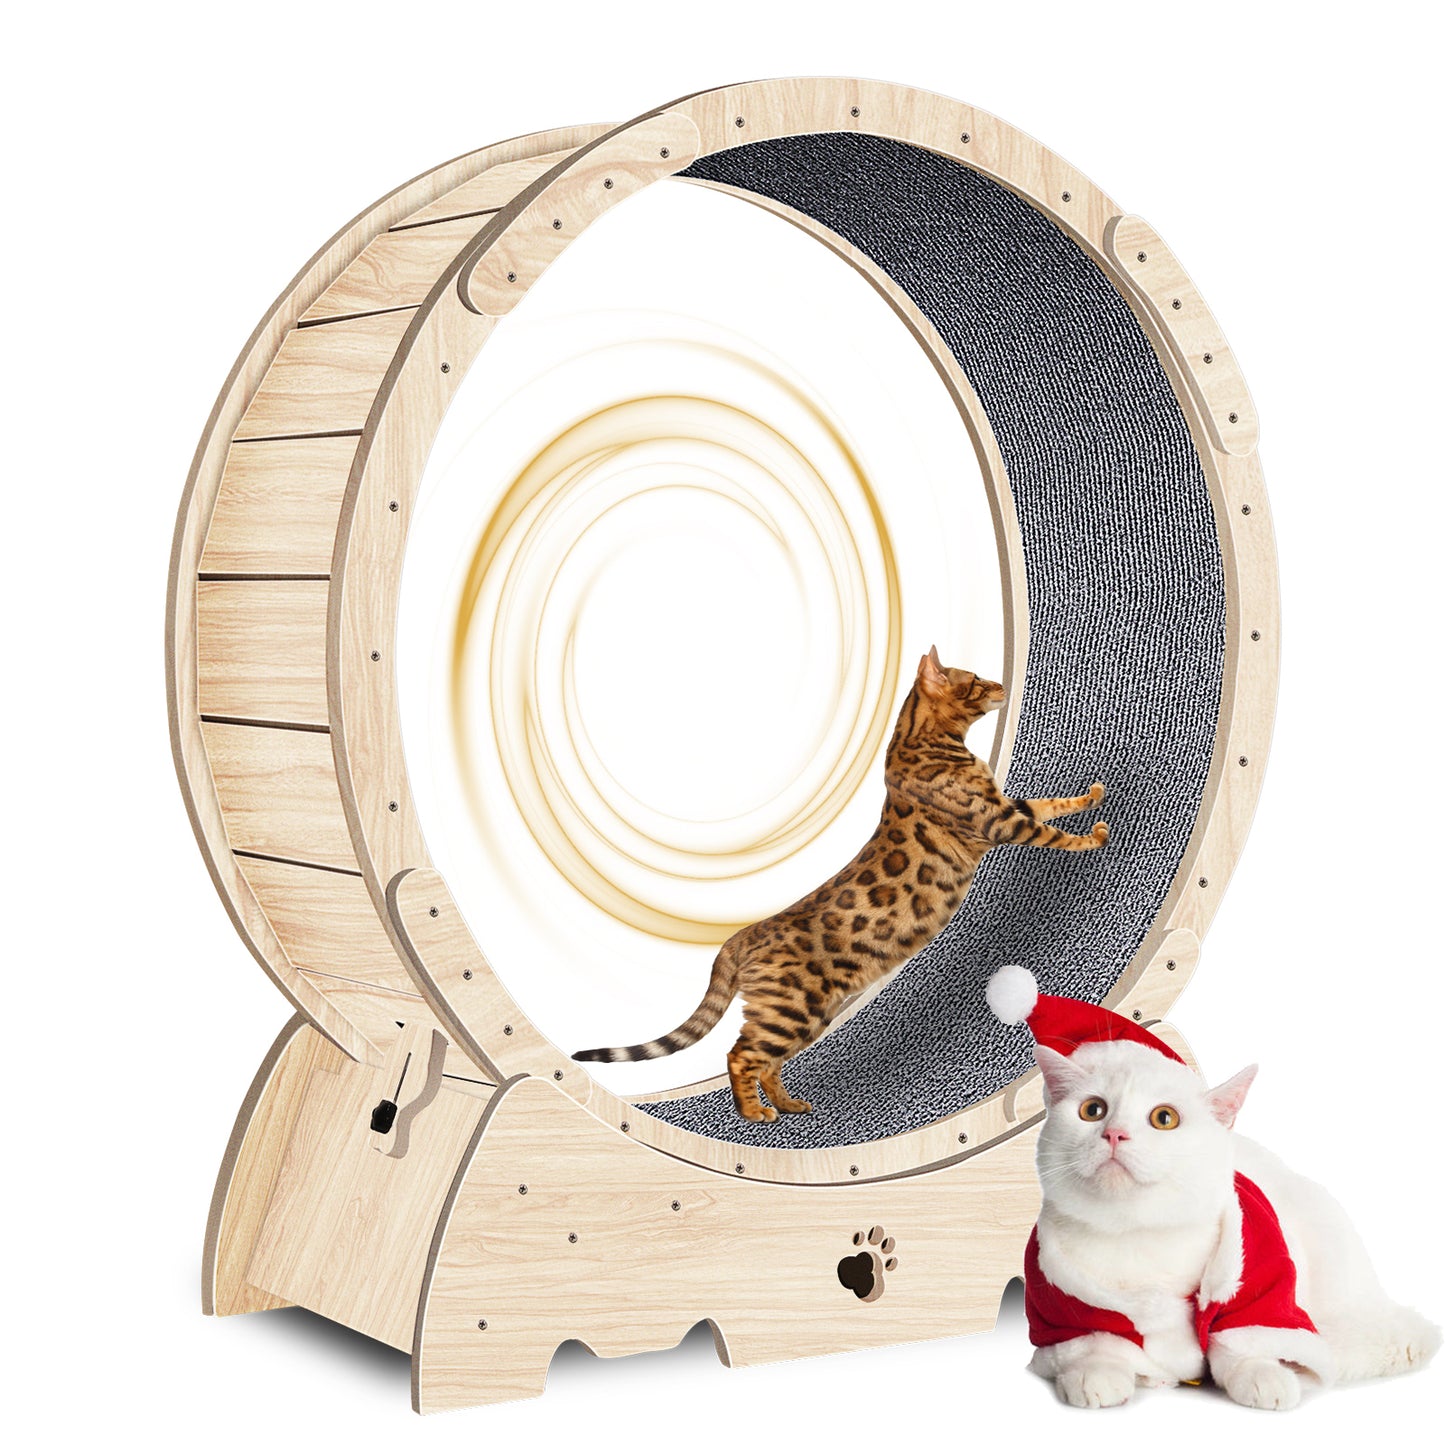 Cat Exercise Wheel for Indoor Cats, Cat Running Wheel with Carpeted Runway, Cat Sport Treadmill Wheel for Kitty's Longer Life, Fitness Weight Loss Device, 41" Natural Wood Color